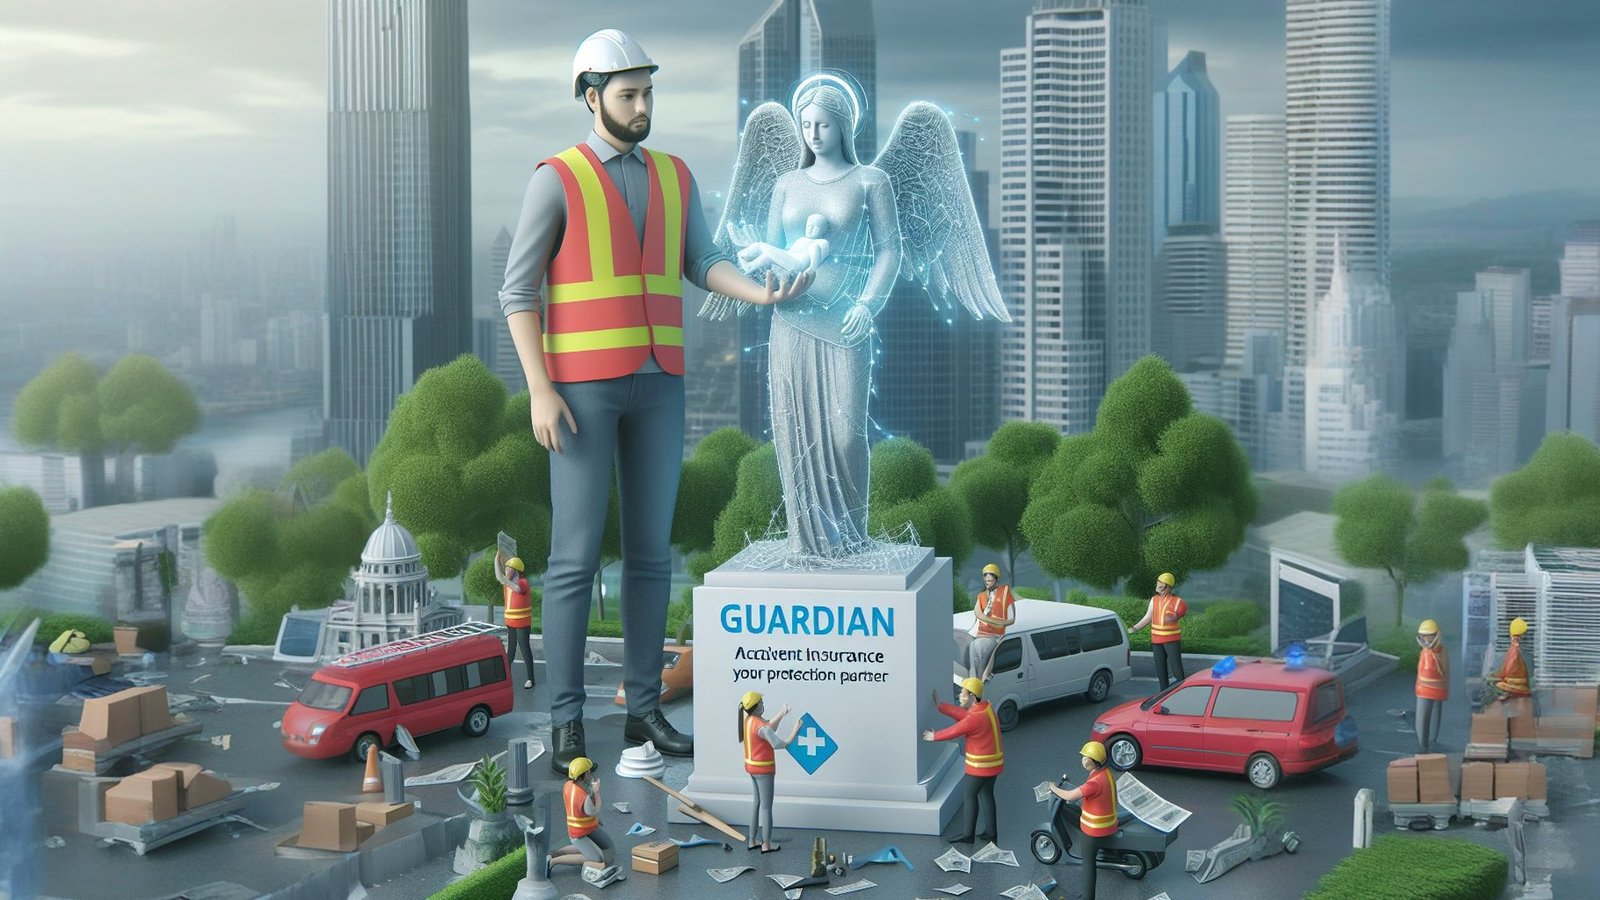 Guardian Accident Insurance: Your Protection Partner